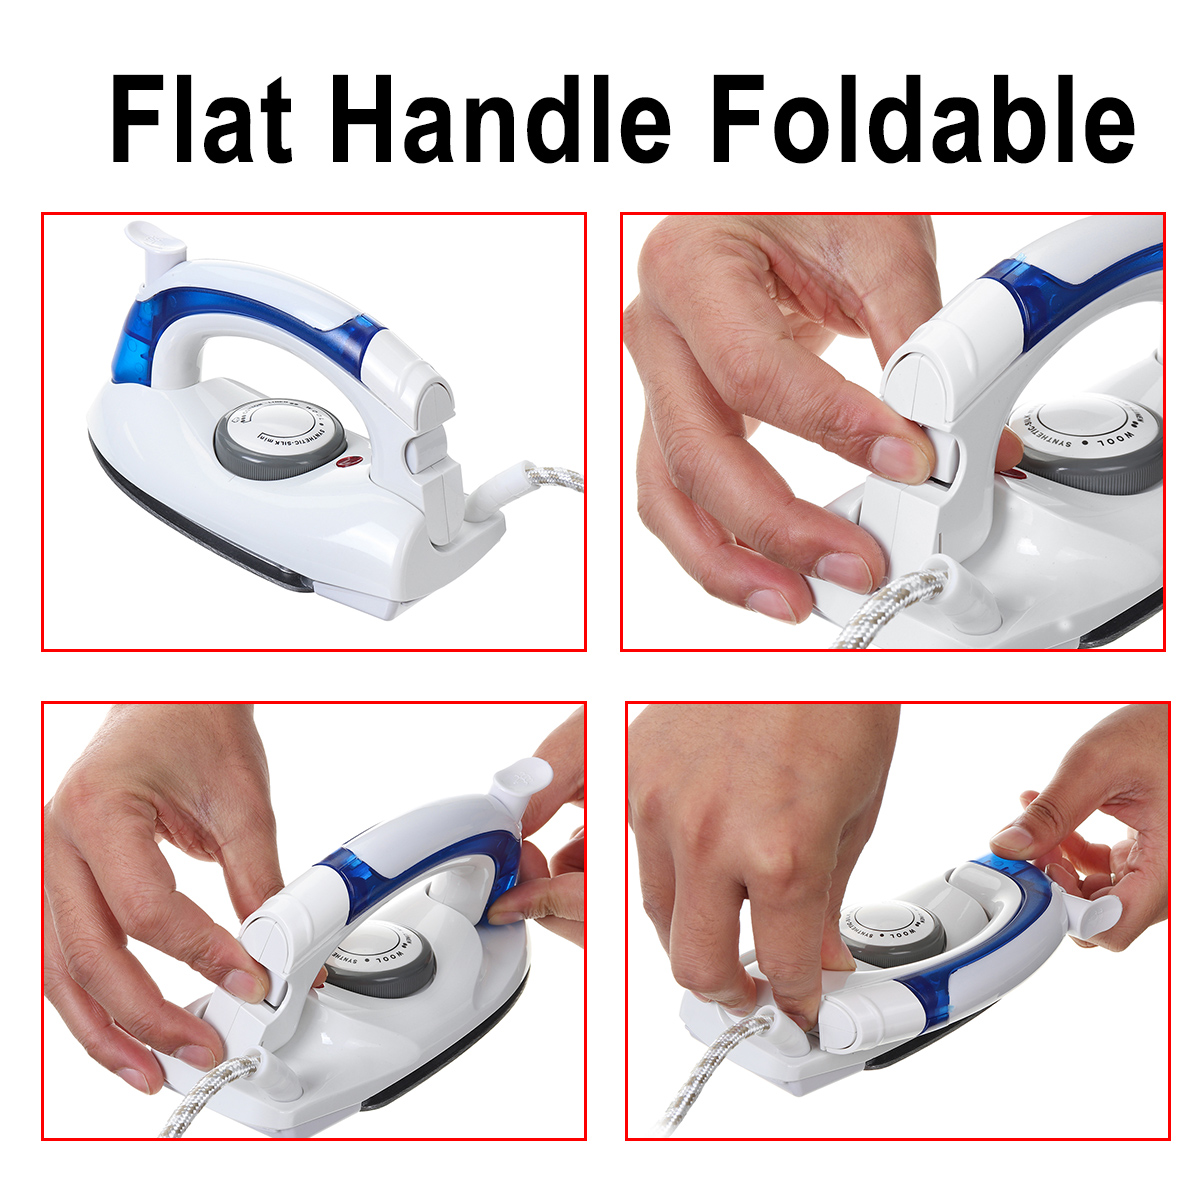 700W-Portable-Handheld-Foldable-Electric-Steam-Iron-3-Gear-Fast-Heat-Up-Garment-Steamer-Wrinkle-Remo-1754049-5